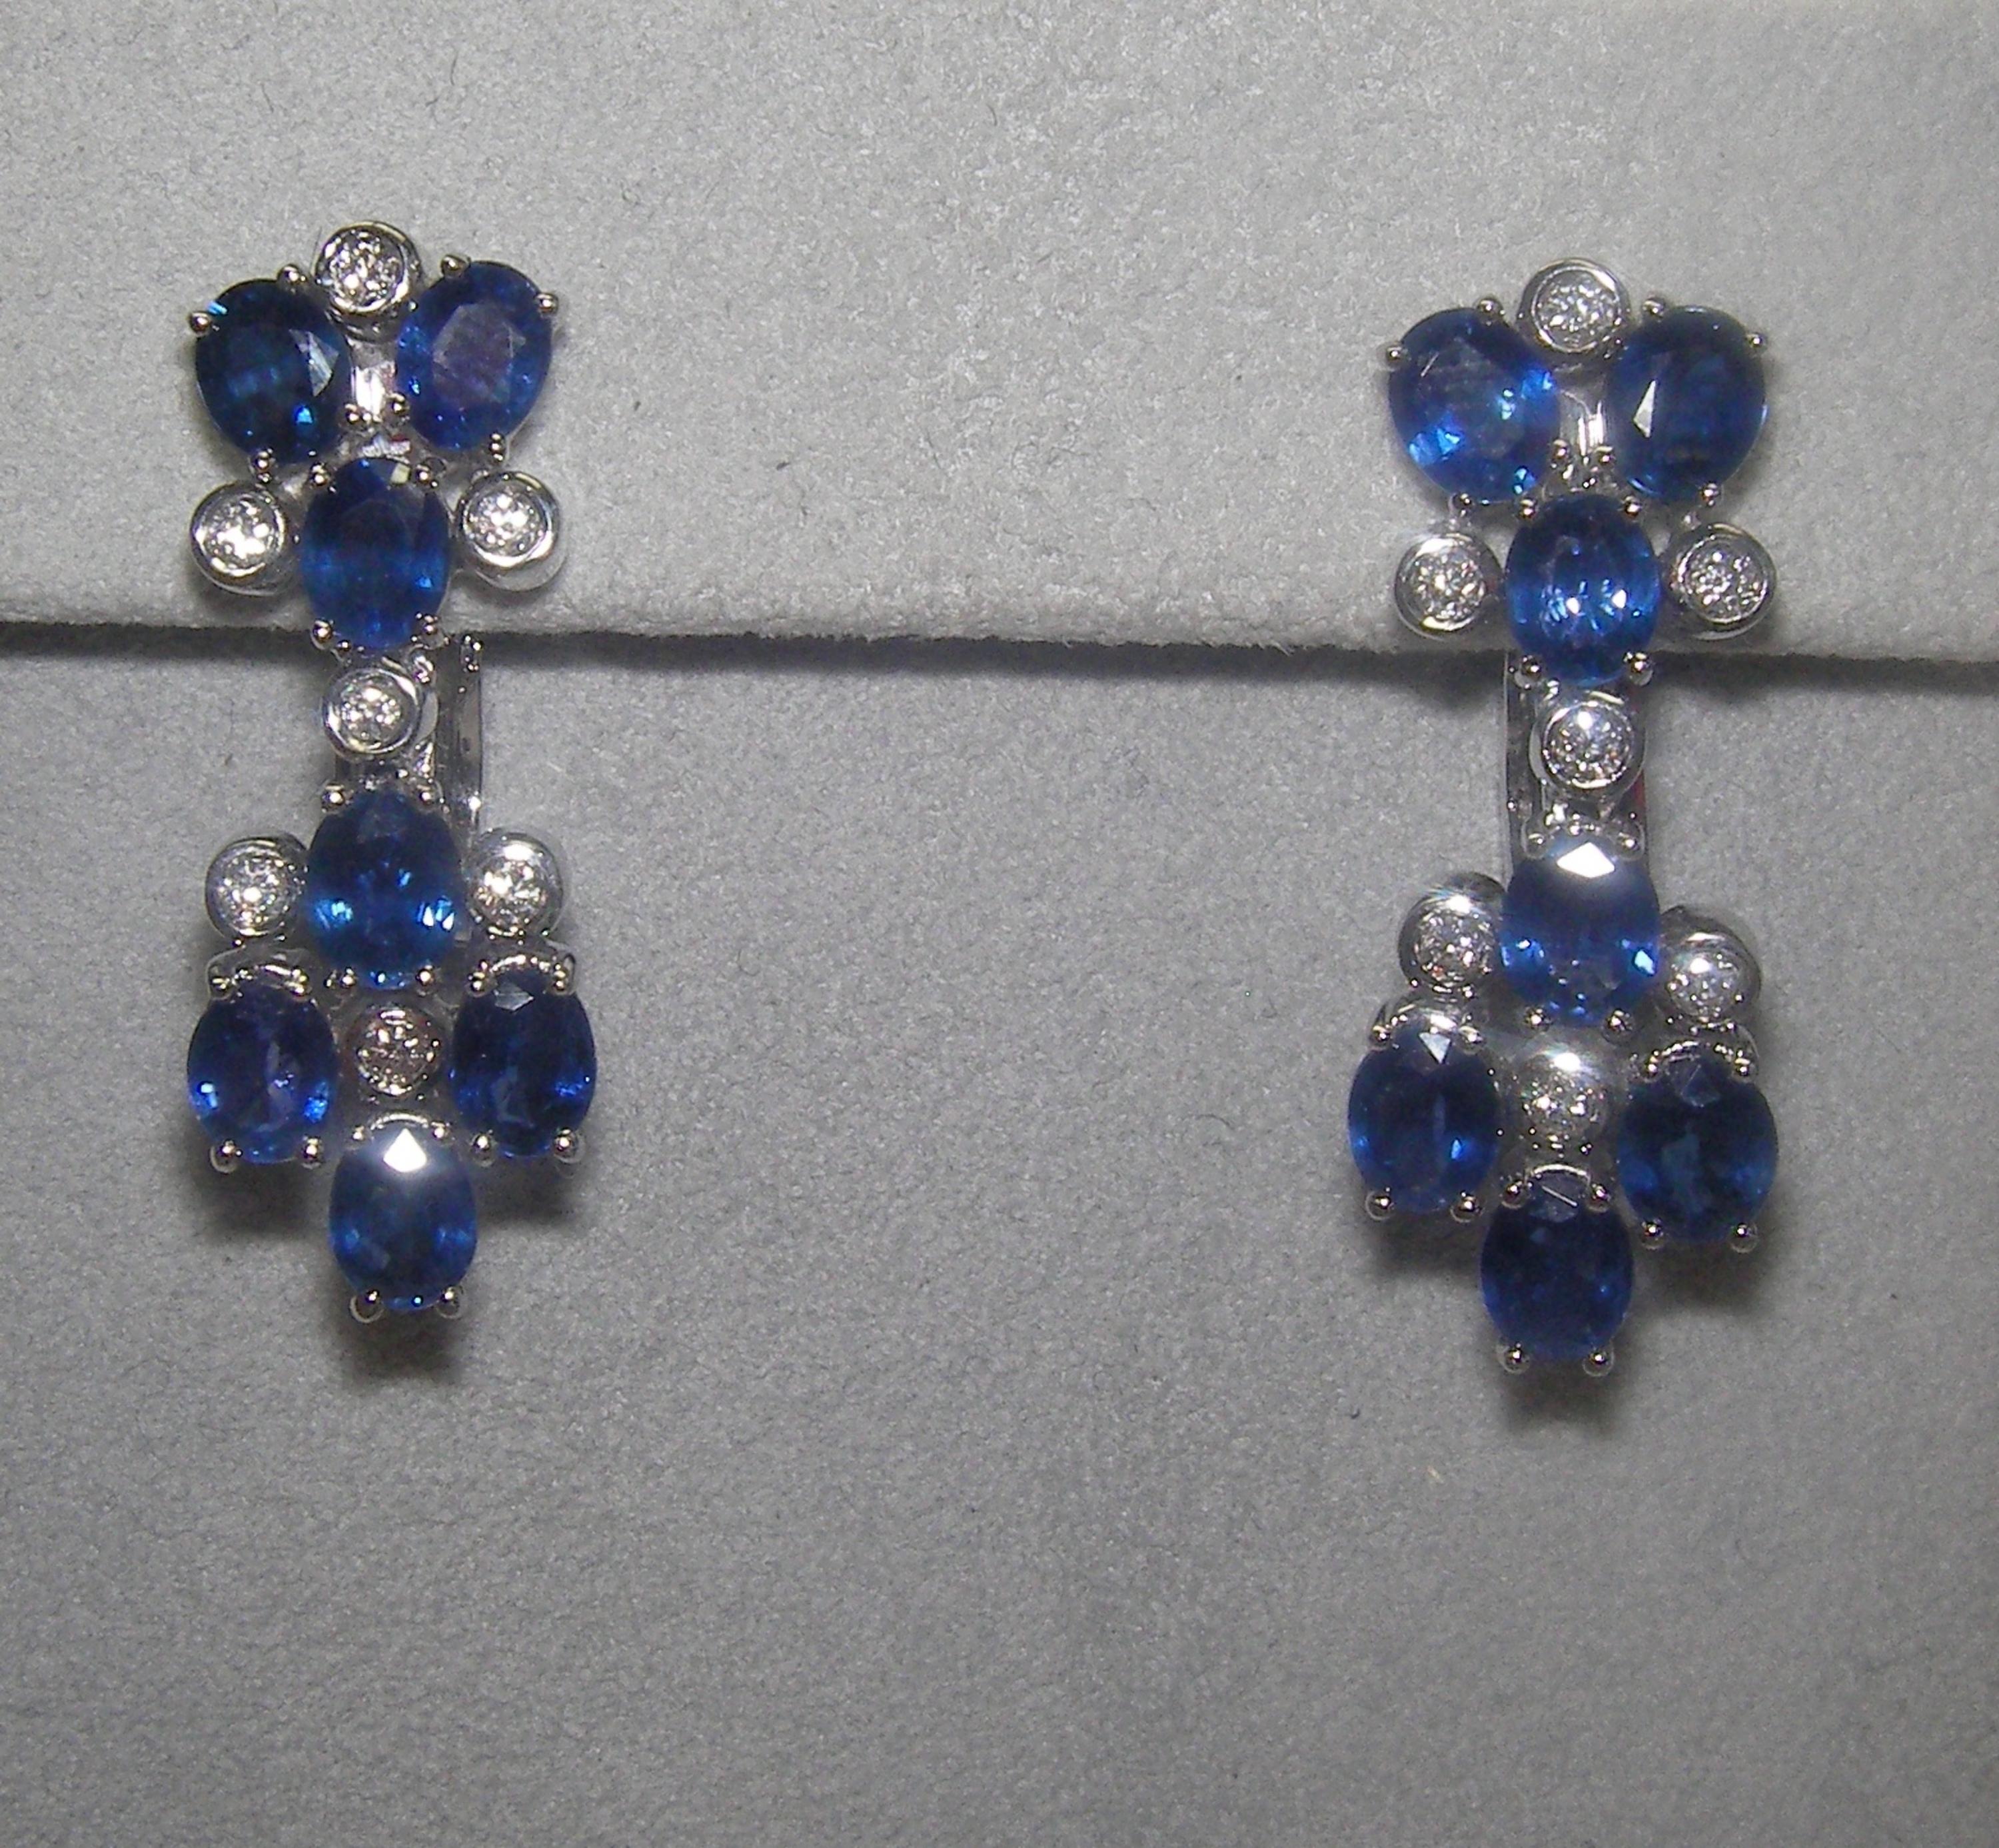 18 Karat White Gold Diamond and Sapphire Dangle Earrings

14  Diamonds 0.24 Carat H SI
14 Sapphires  5,76 Carat


Founded in 1974, Gianni Lazzaro is a family-owned jewelry company based out of Düsseldorf, Germany.
Although rooted in Germany, Gianni